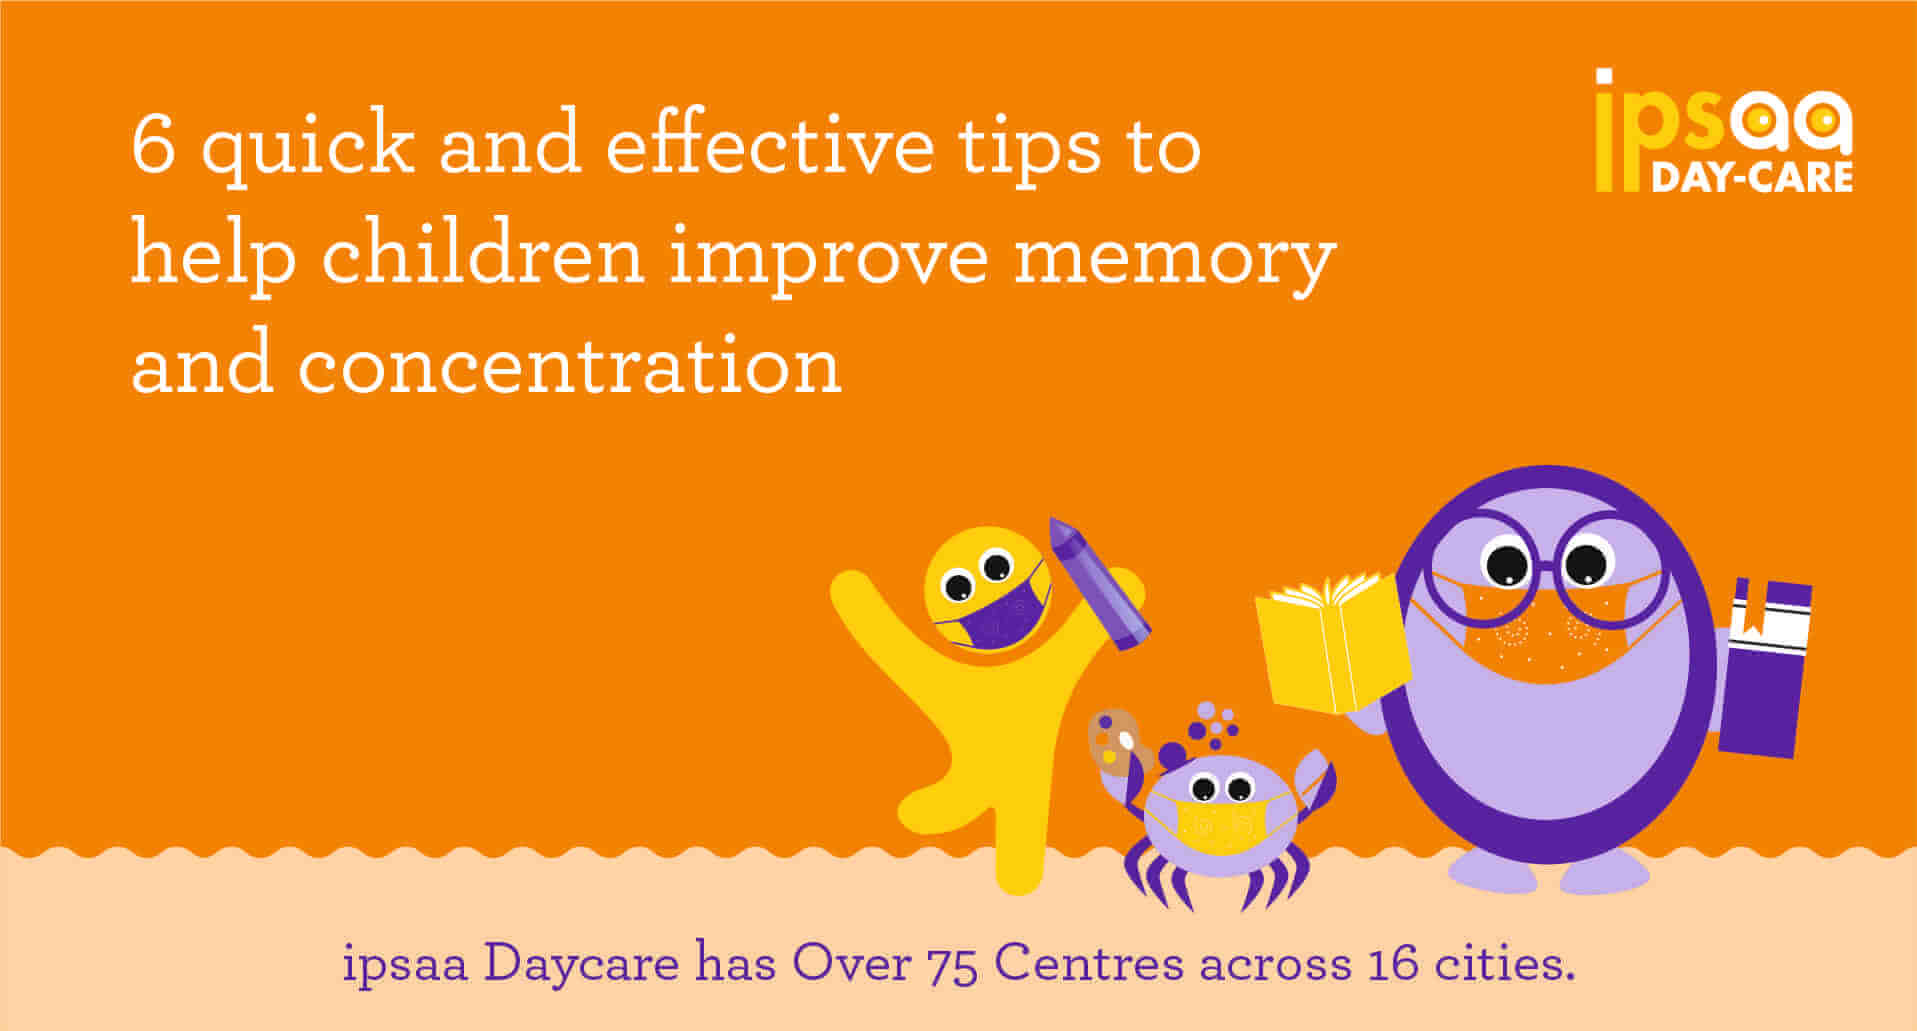 How to improve your child’s memory and concentration?